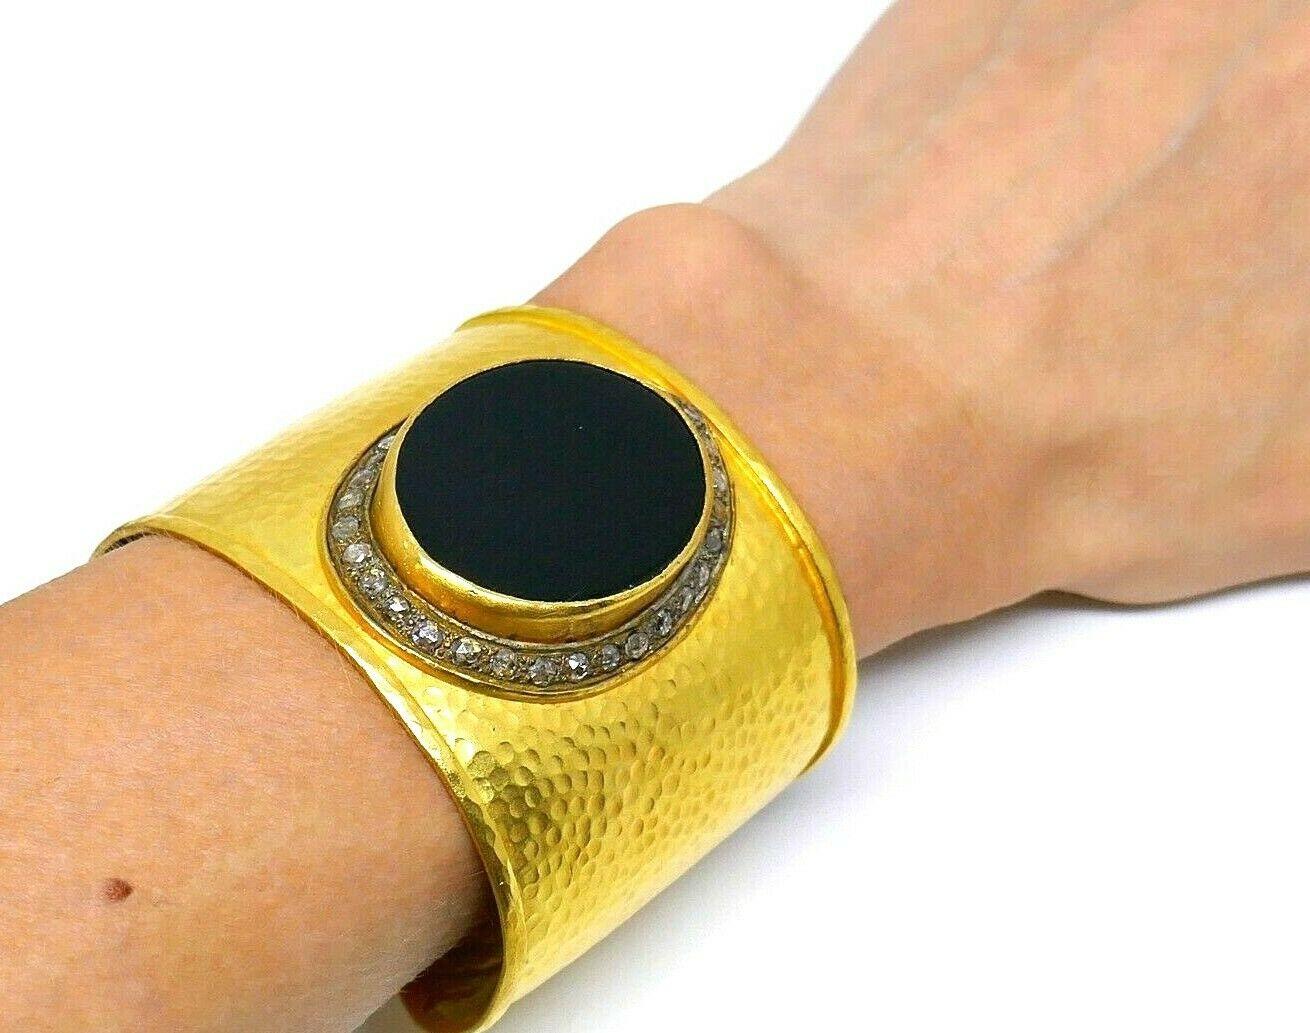 Wide impressive hammered yellow gold cuff bracelet  featuring onyx surrounded by rose cut diamonds.
Measurements: inner circumference is 6 inches, width is 2 inches. Intended for small to medium-sized wrists.
Weight is 74.9 grams

